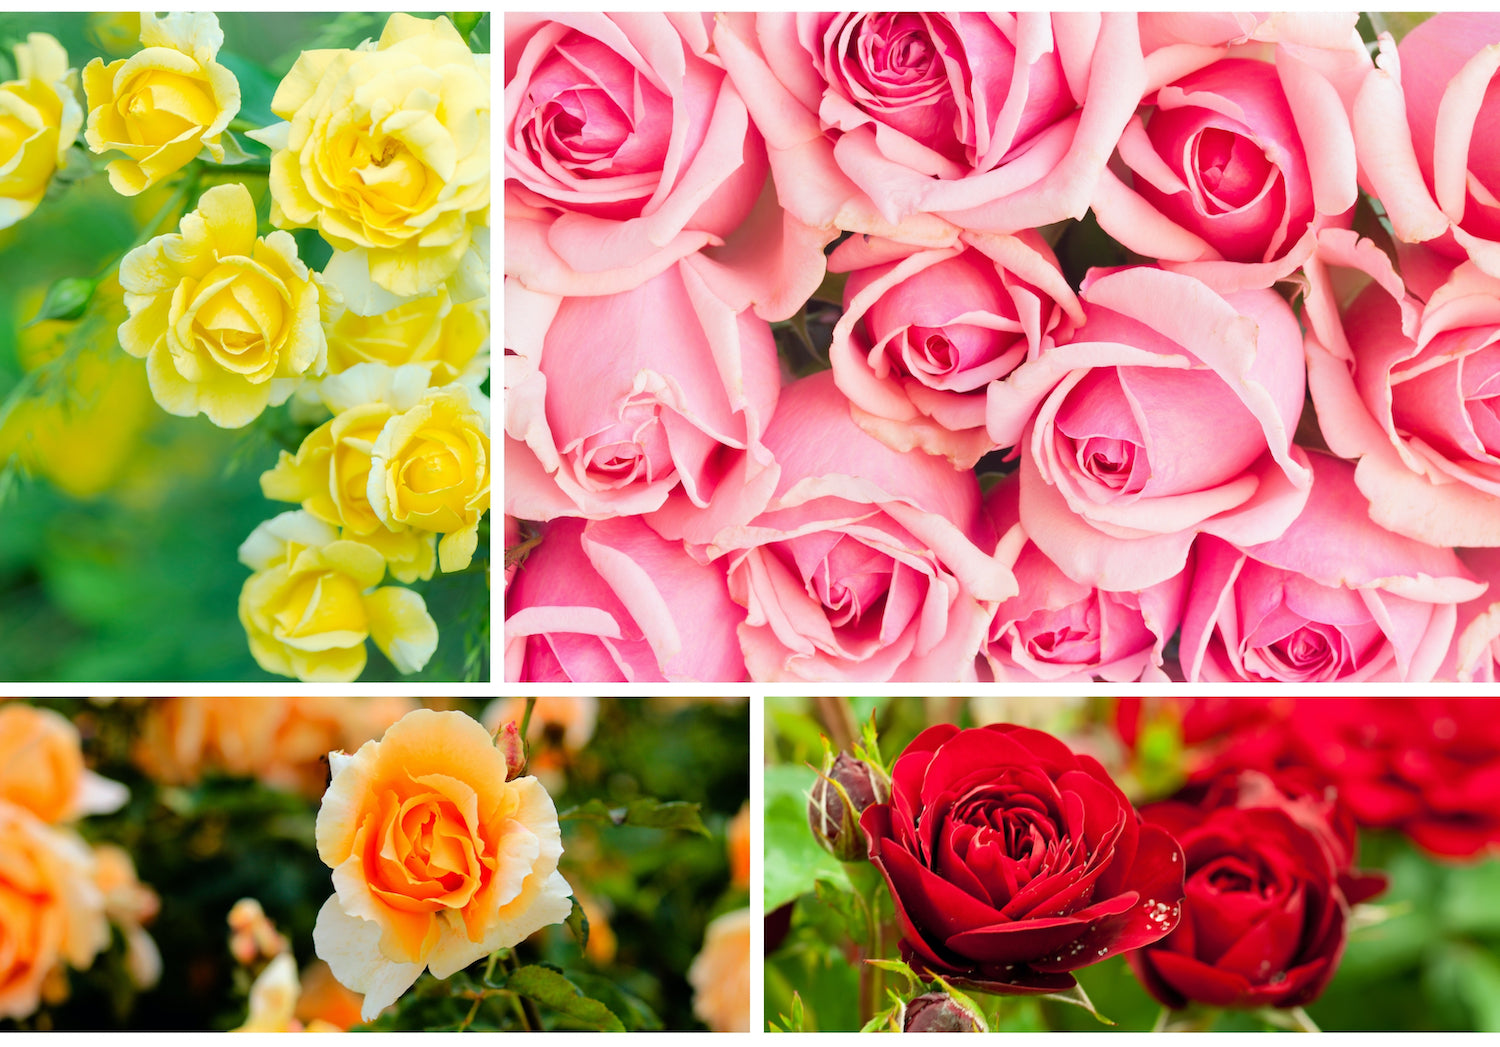 Types of Roses and Rose Care